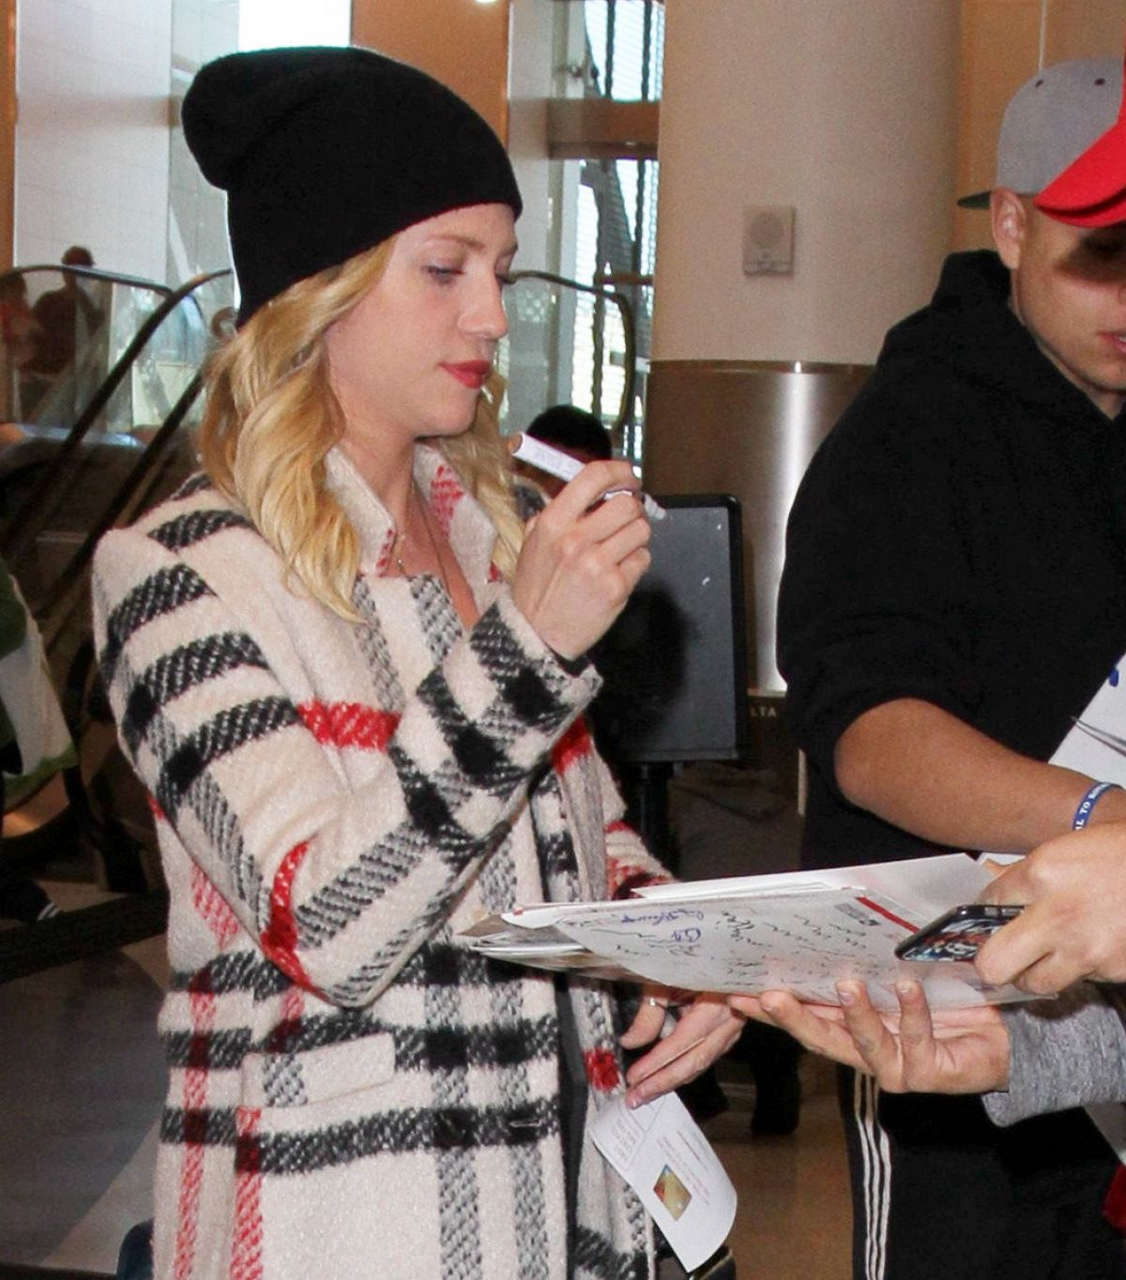 Brittany Snow Lax Airport Los Angeles